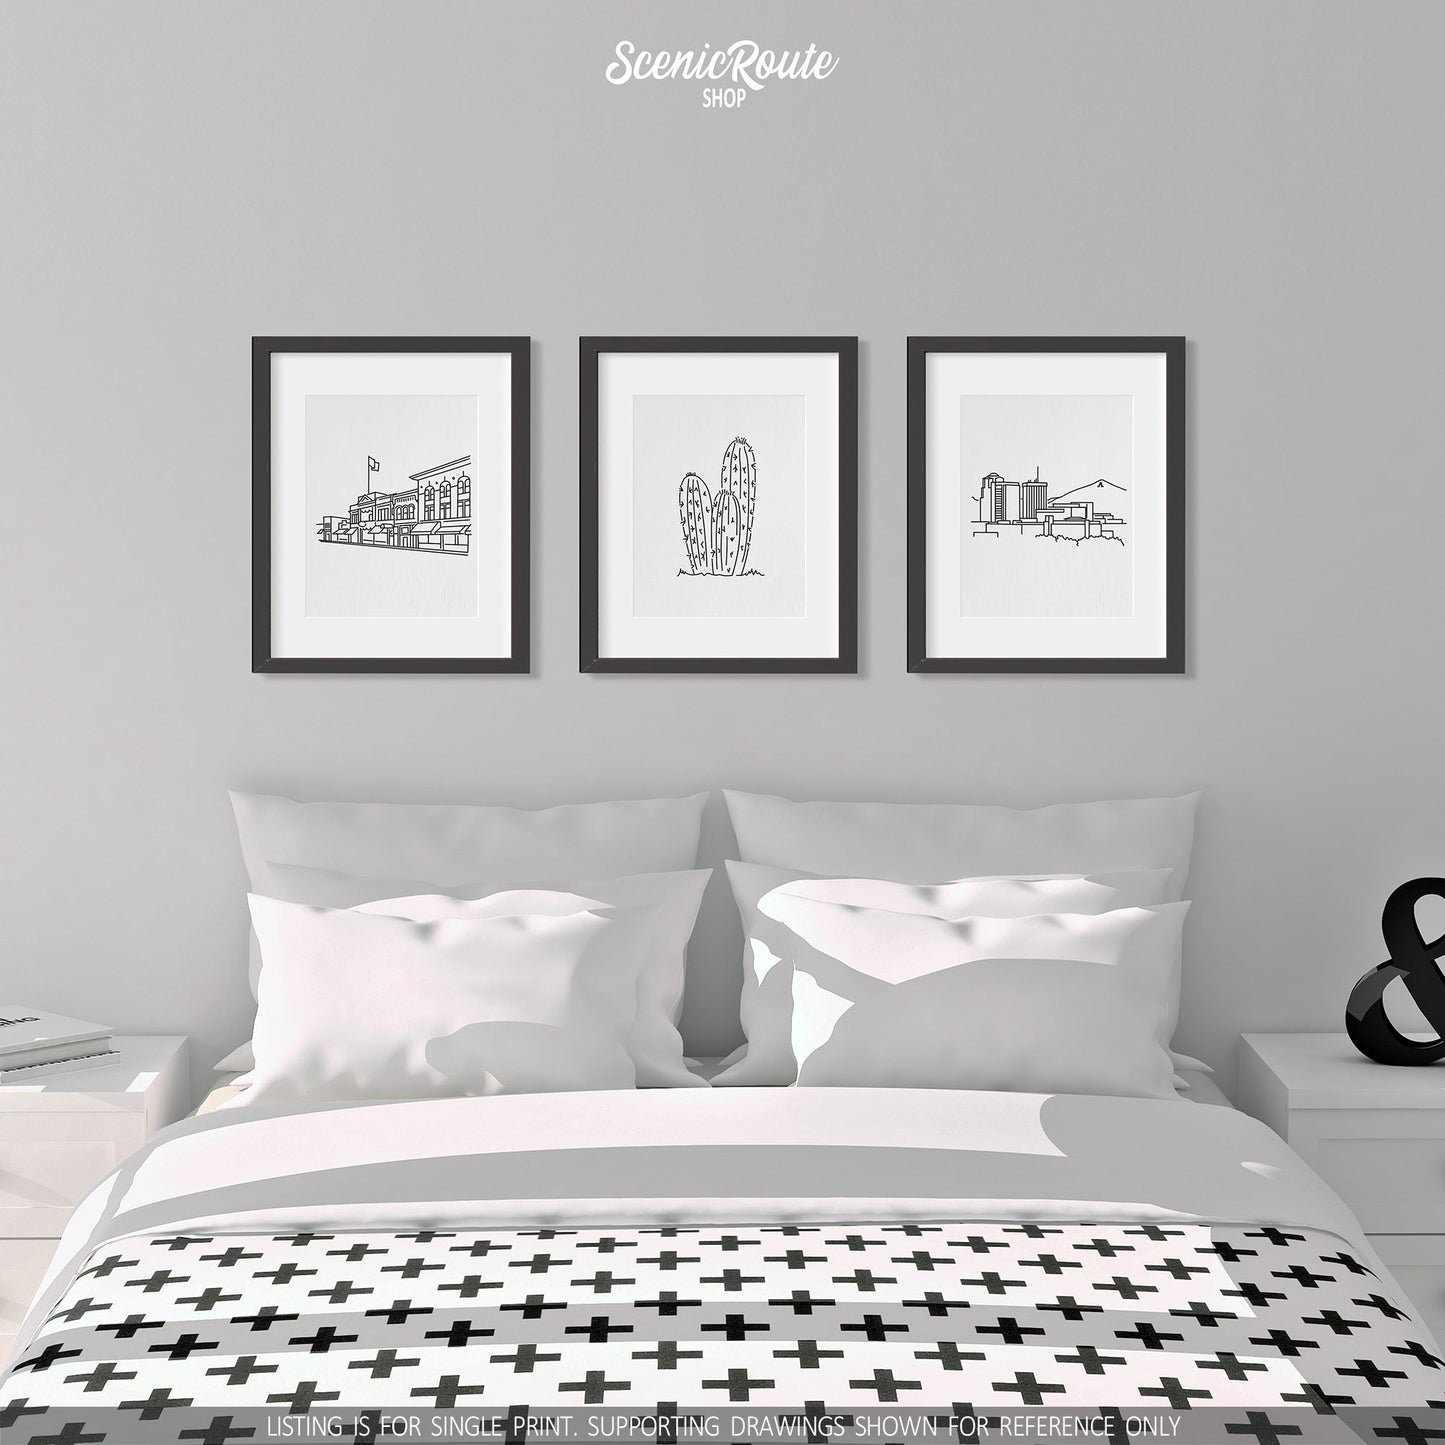 A group of three framed drawings on a white wall above a bed. The line art drawings include the Prescott Skyline, a Torch Cactus, and the Tucson Skyline